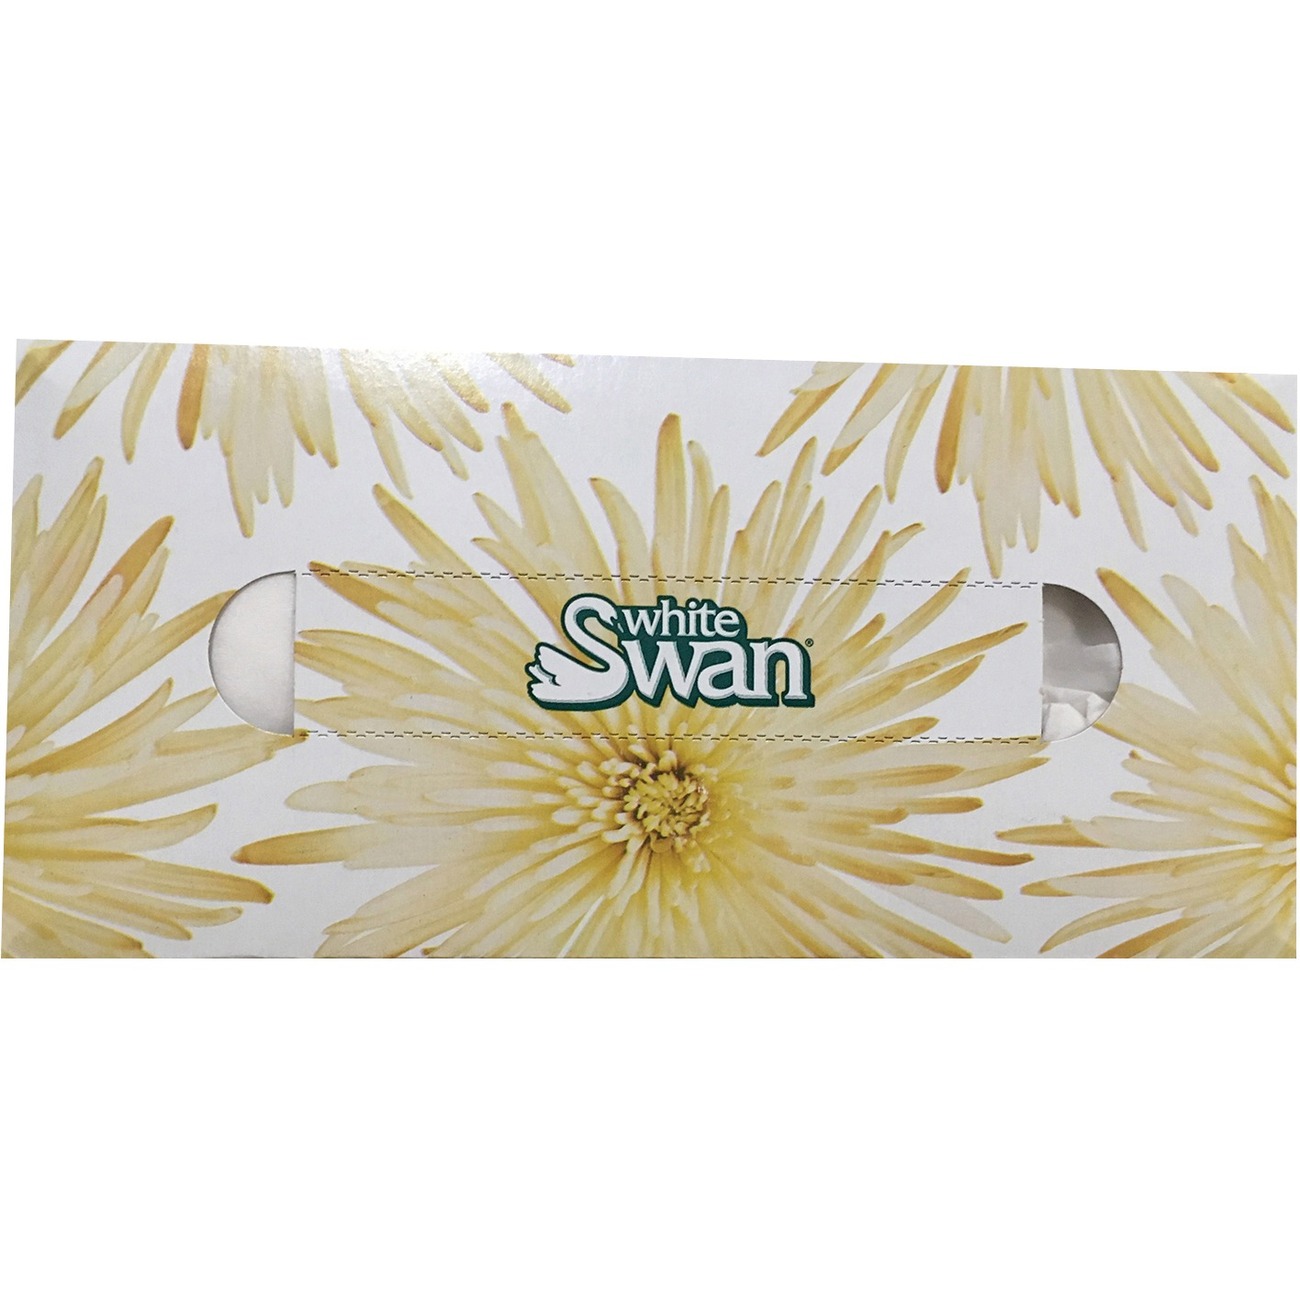 Challenge Industries Ltd. :: Cleaning & Breakroom :: Cleaning Supplies ::  Paper Products & Dispensers :: Facial Tissues :: WHITE SWAN® 2-Ply Facial  Tissue - 2 Ply - White - 100 - 30 / Box